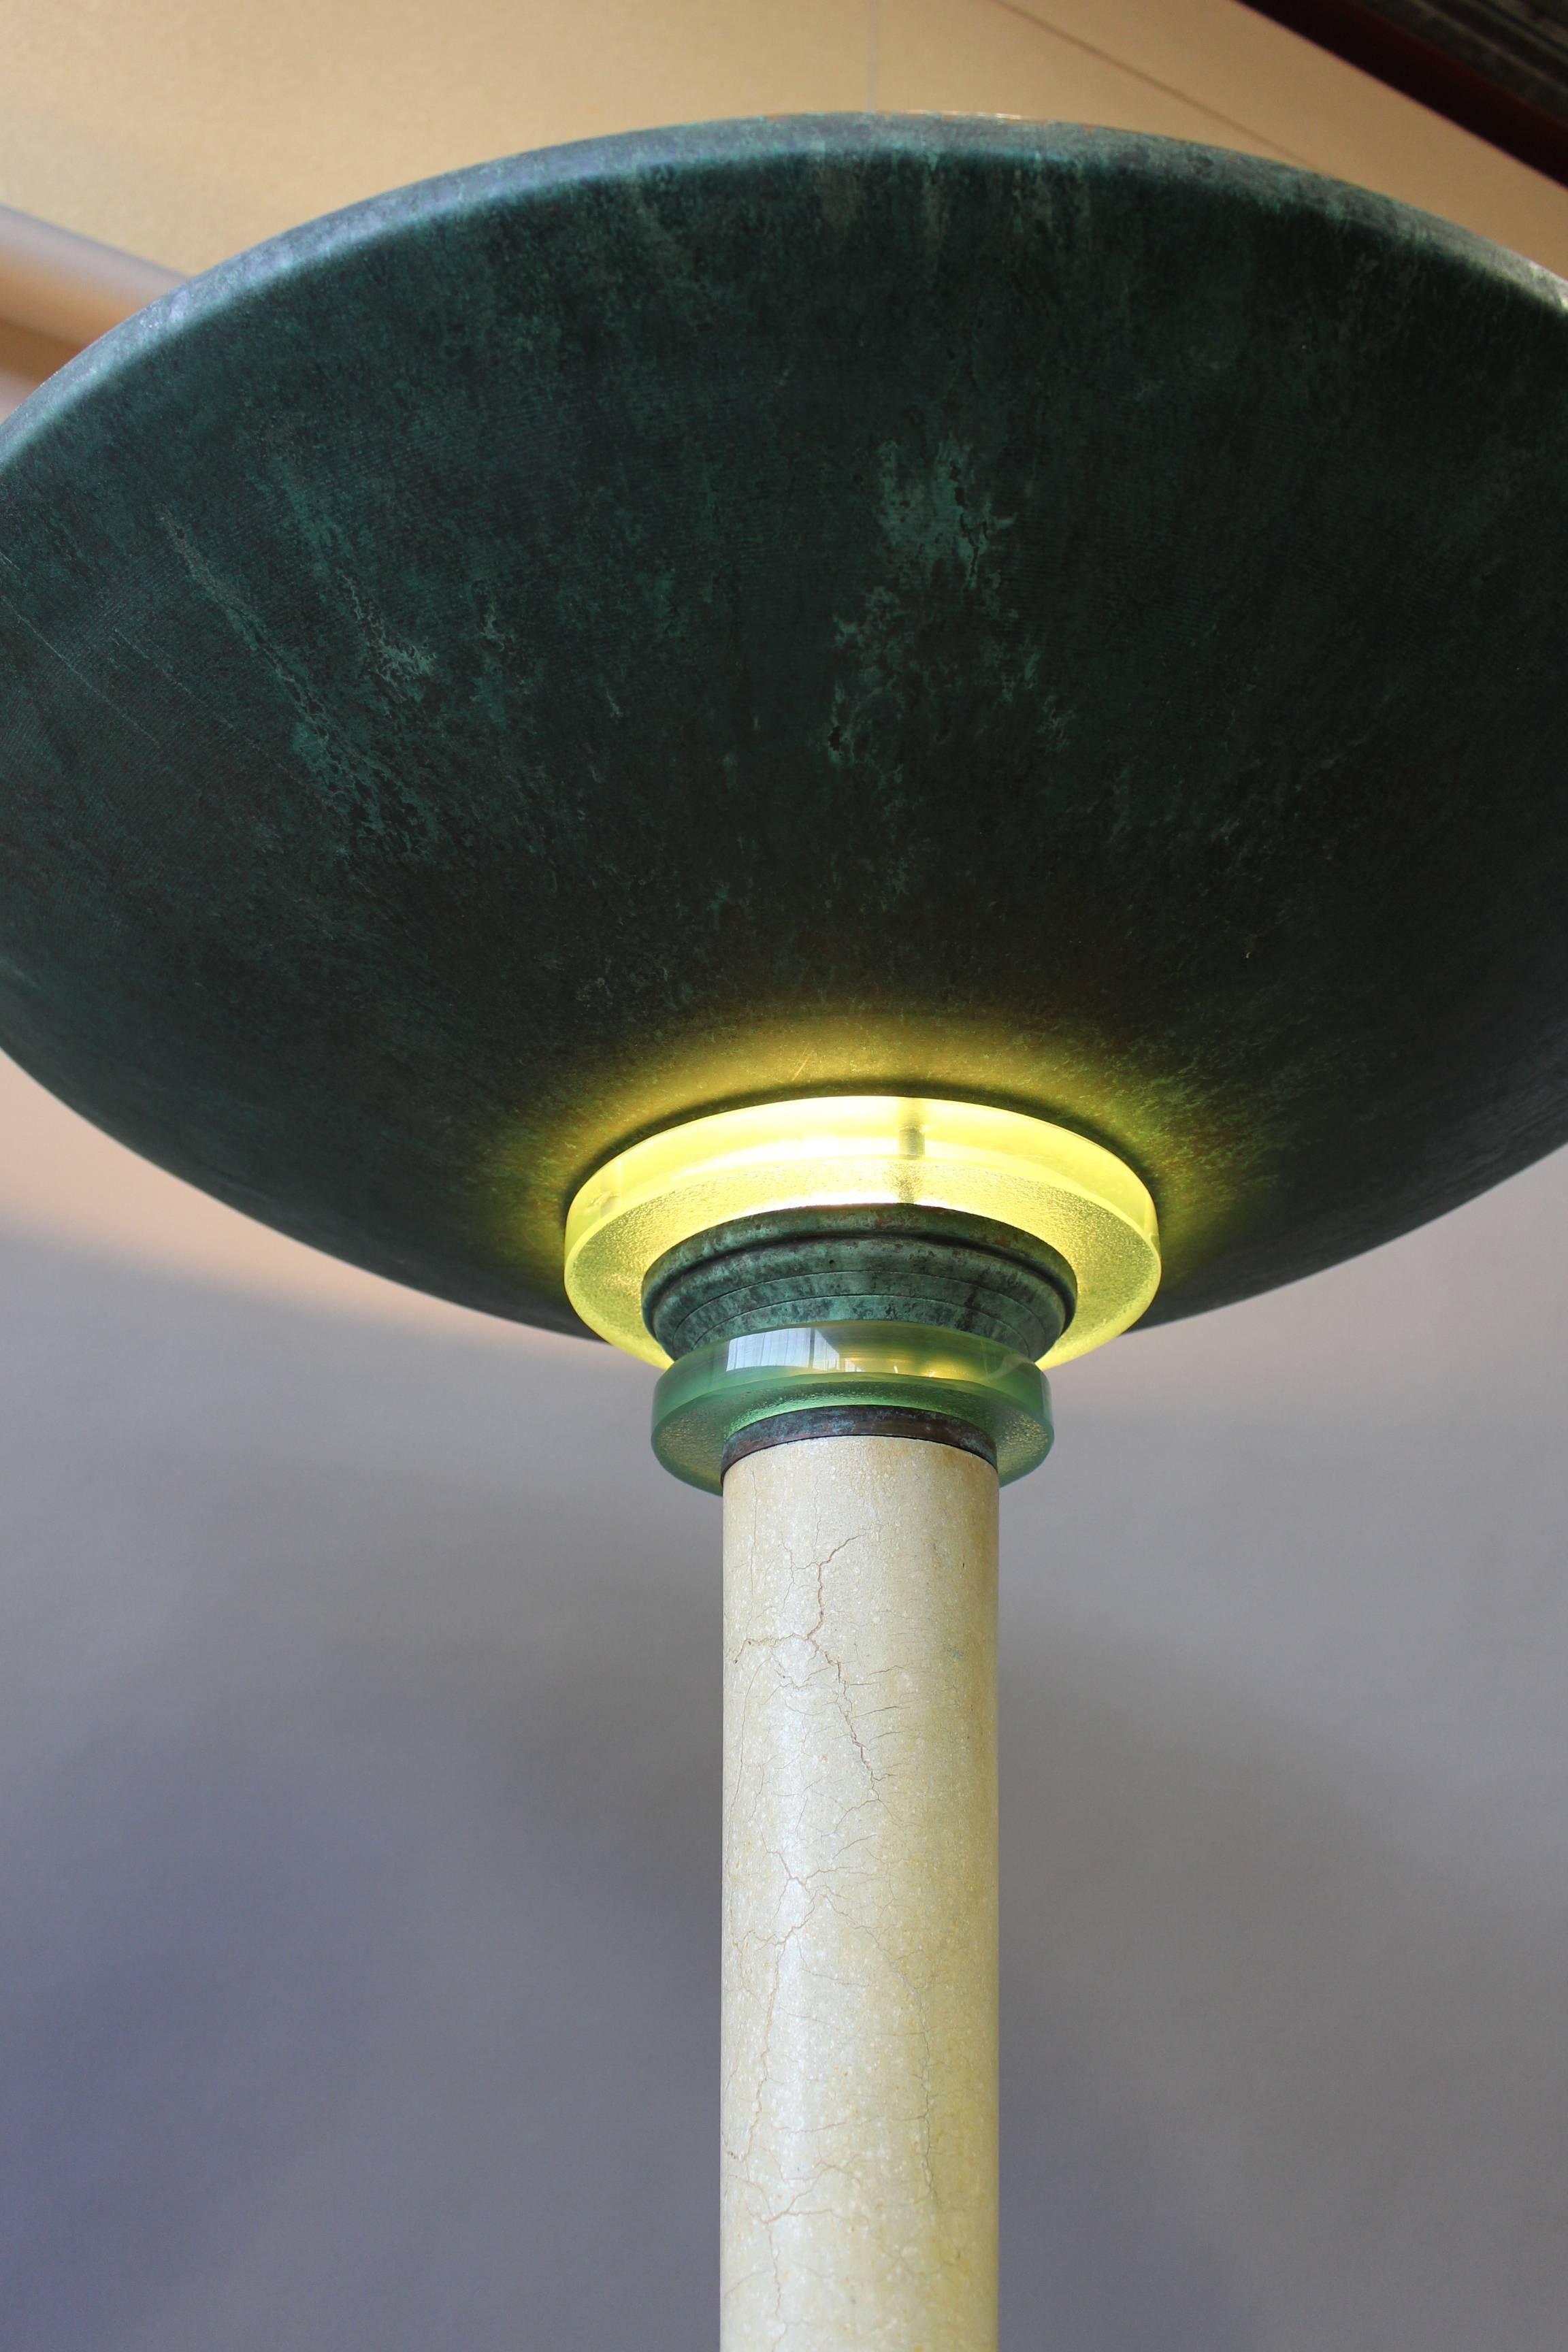 A Large Fine French Art Deco Patina-ed Wood and Metal Floor Lamp For Sale 1